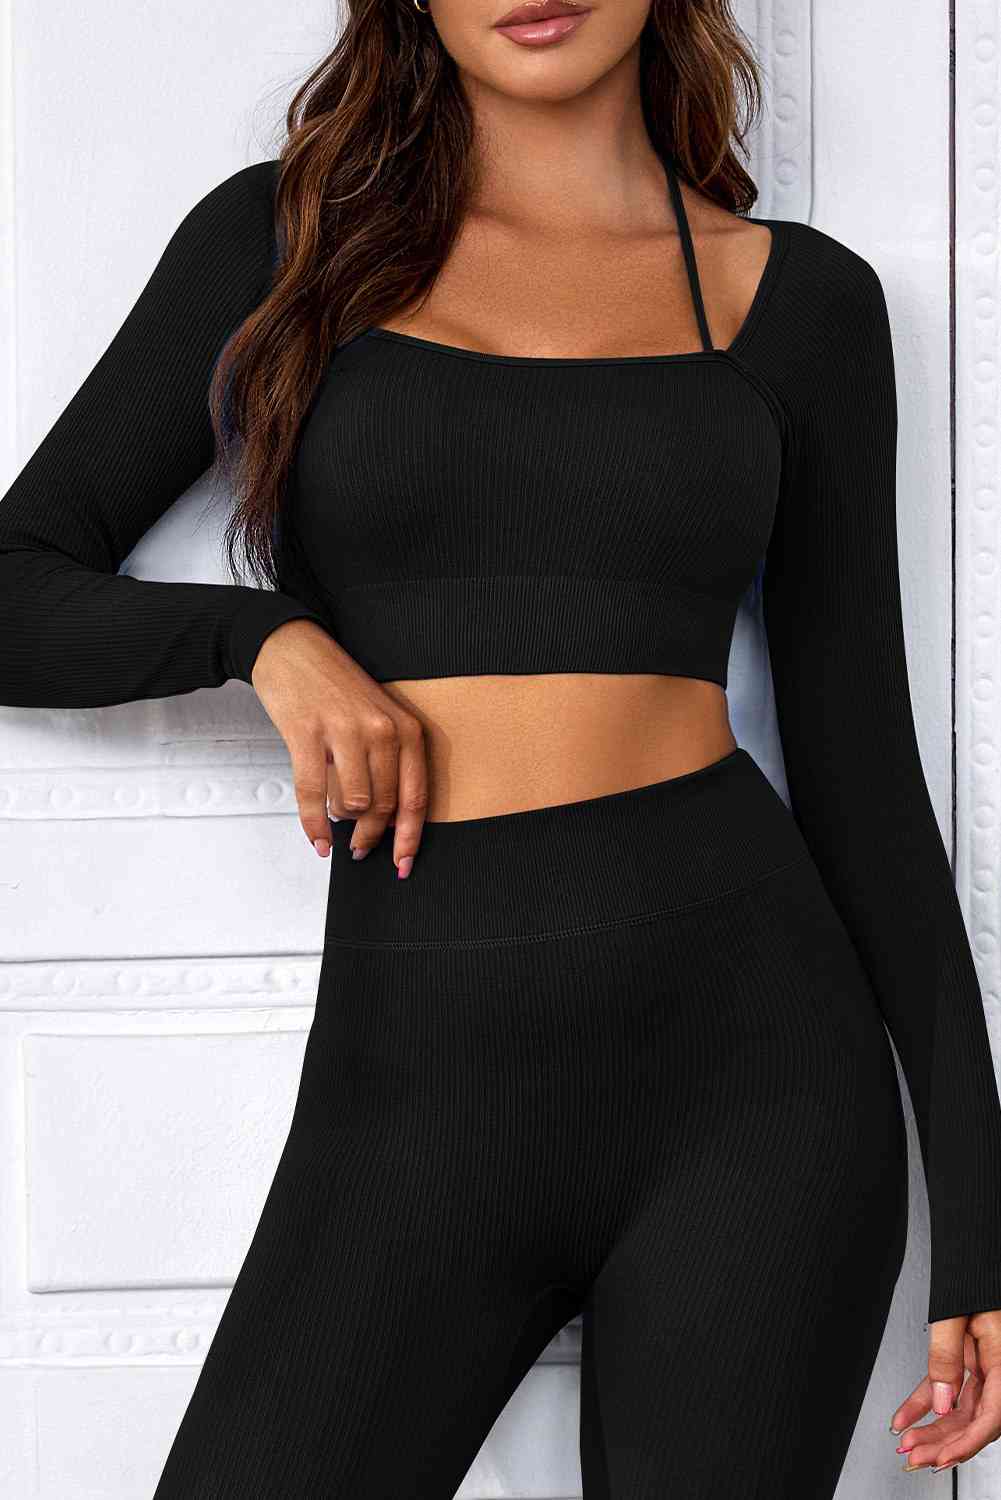 Trendsi cropped top Black / S Long Sleeve Cropped Sports Top